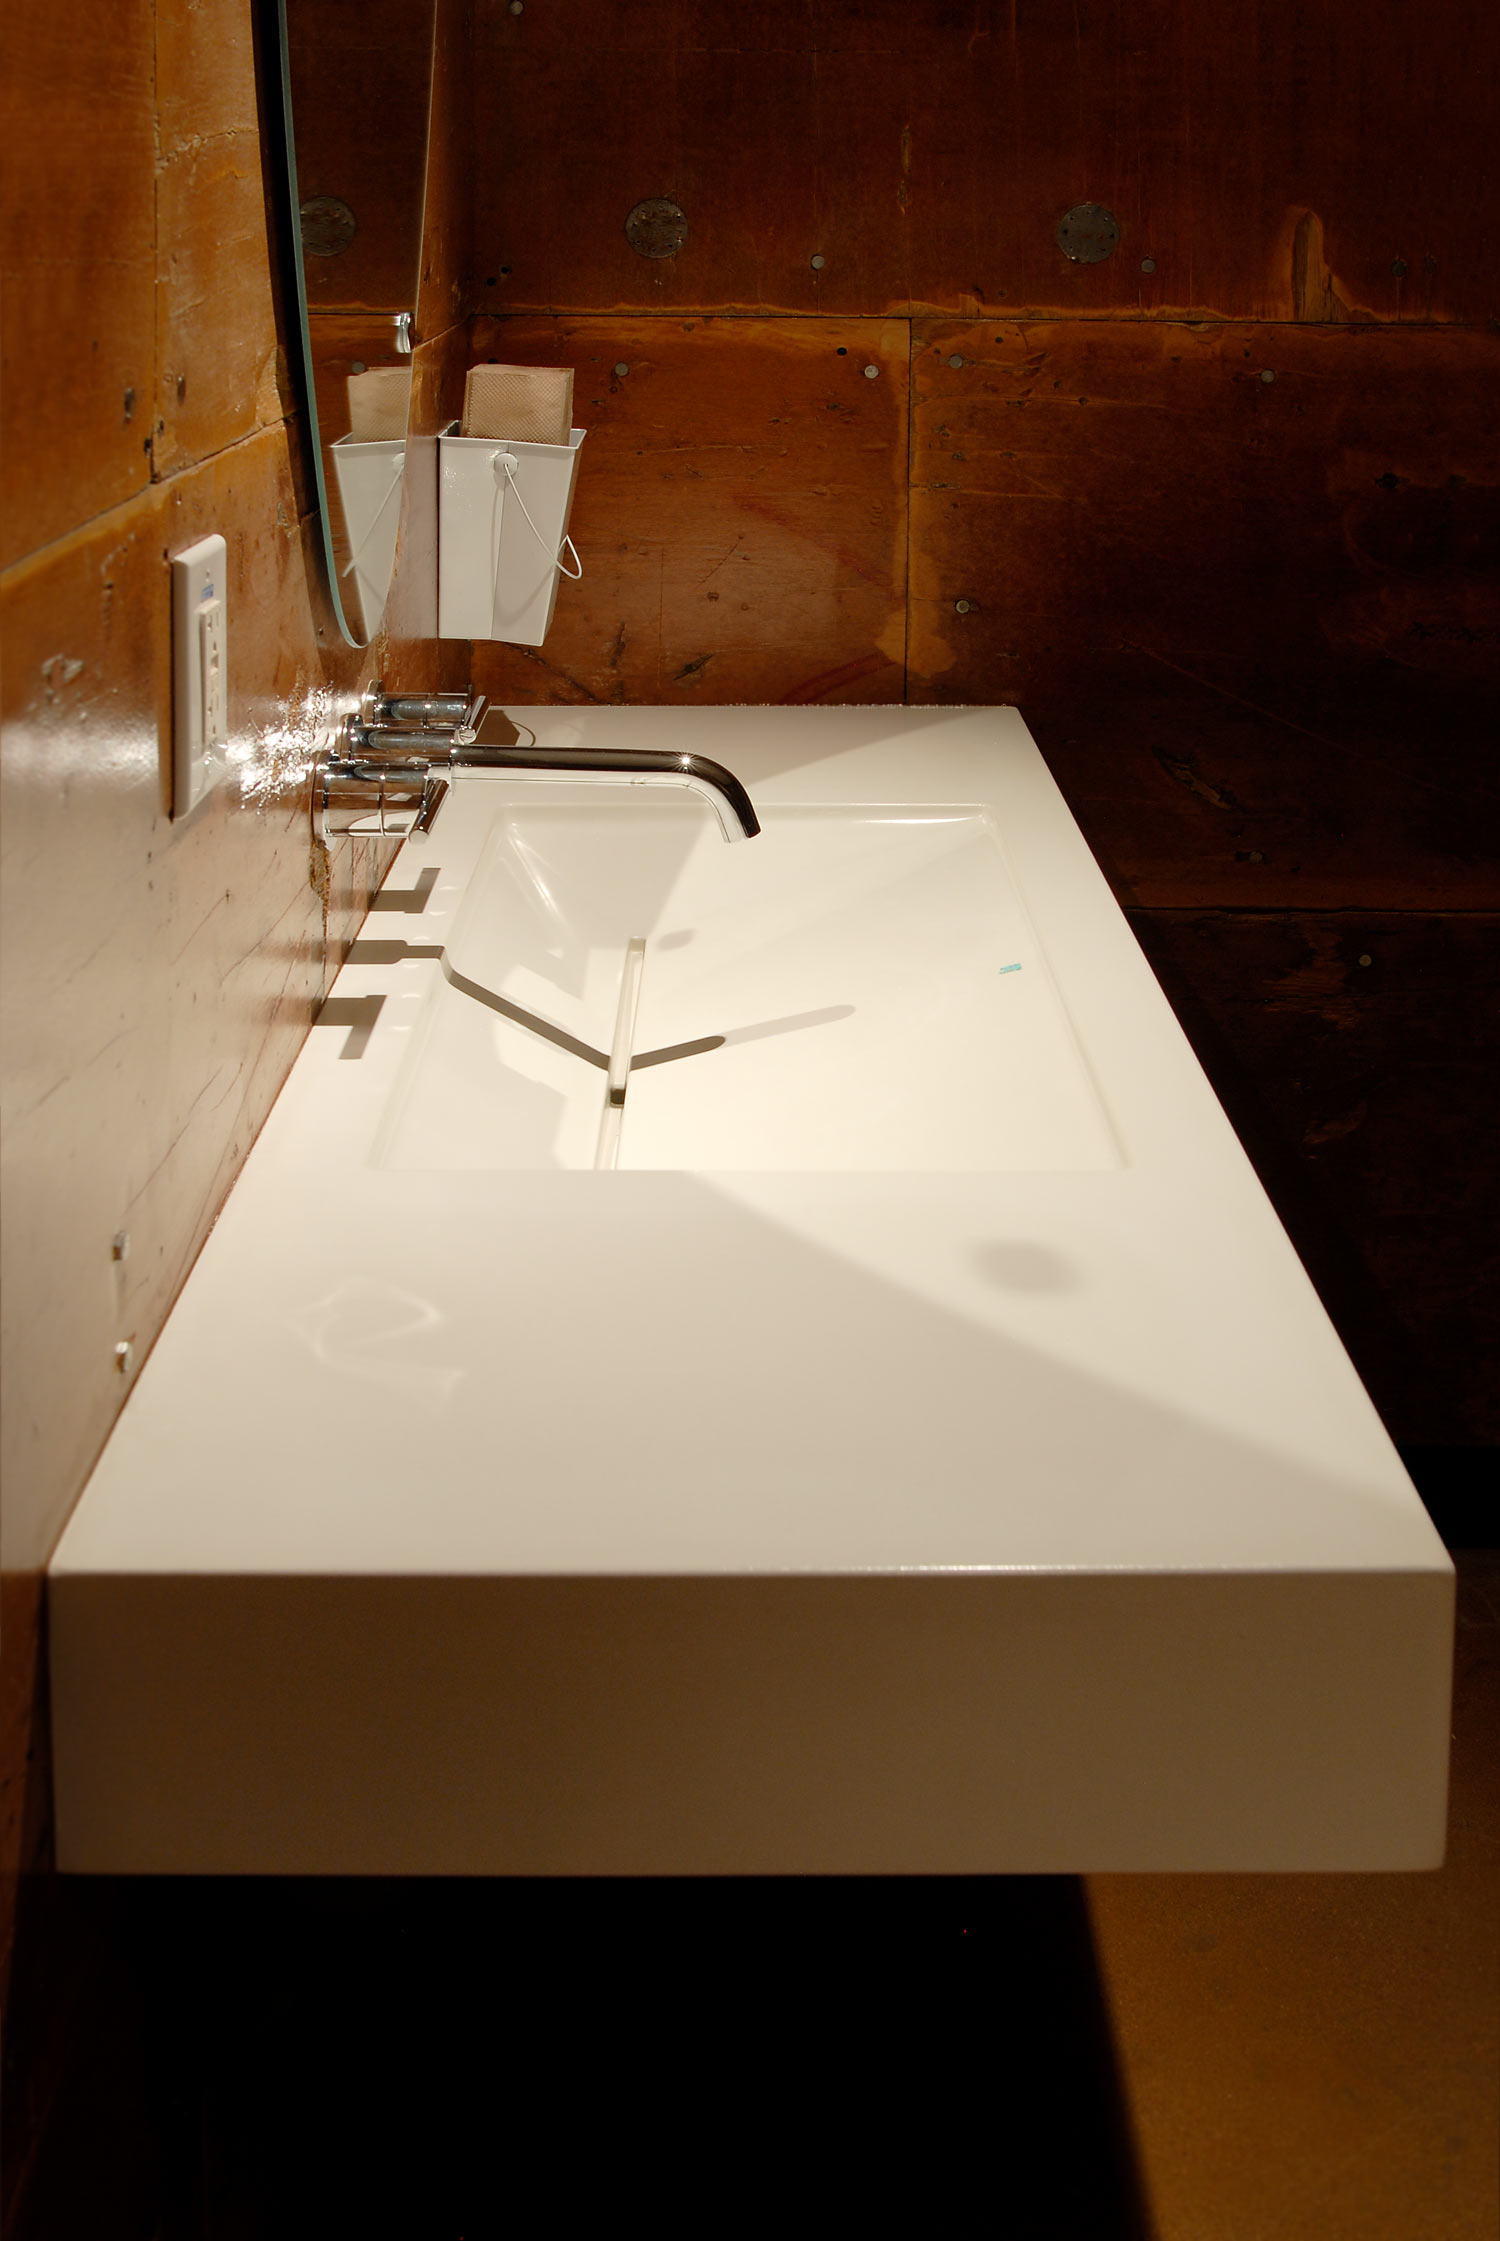 Floating white concrete ramp sink in a ADA compliant bathroom at a restaurant in downtown Phoenix, AZ. This white gfrc sink features a turquoise inlay.